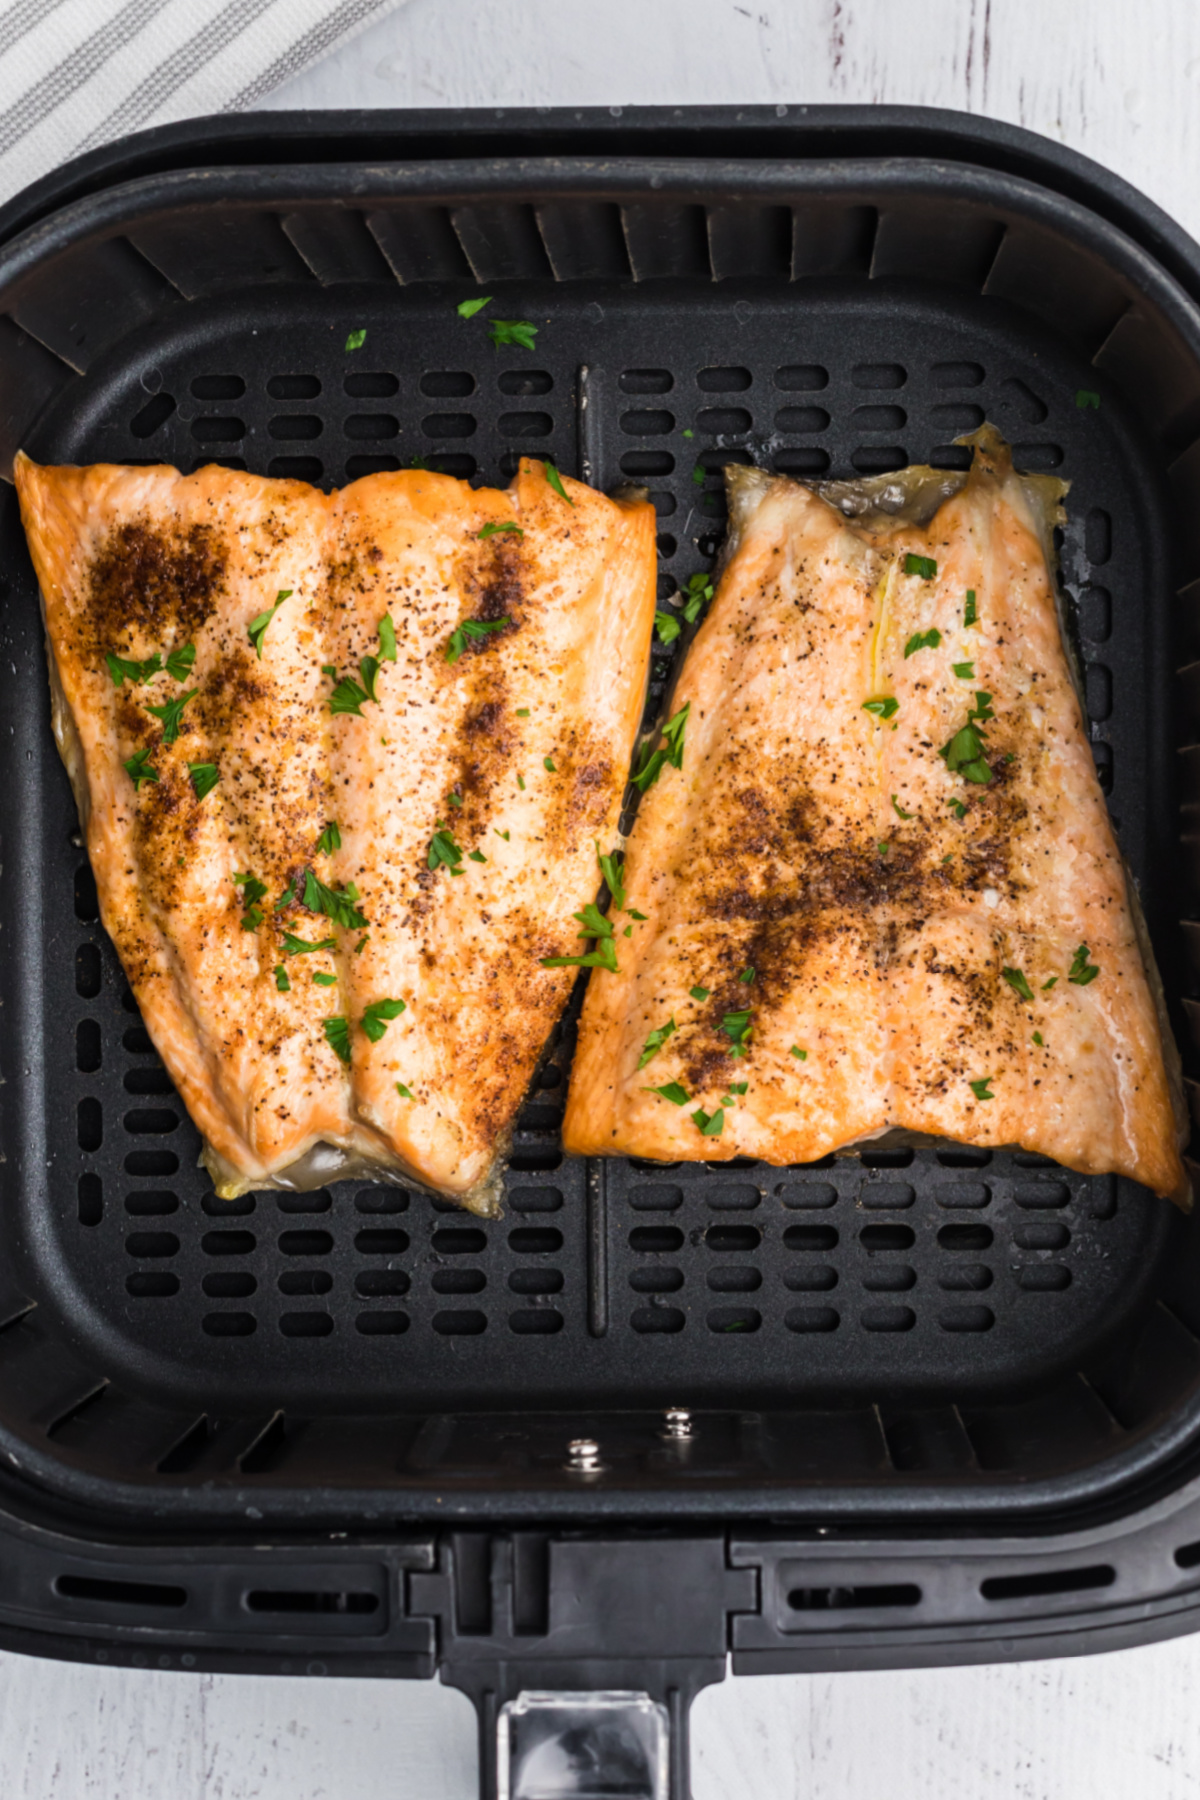 Salmon cooked and served in the basket of the air fryer, ready to be cut and served on a plate.